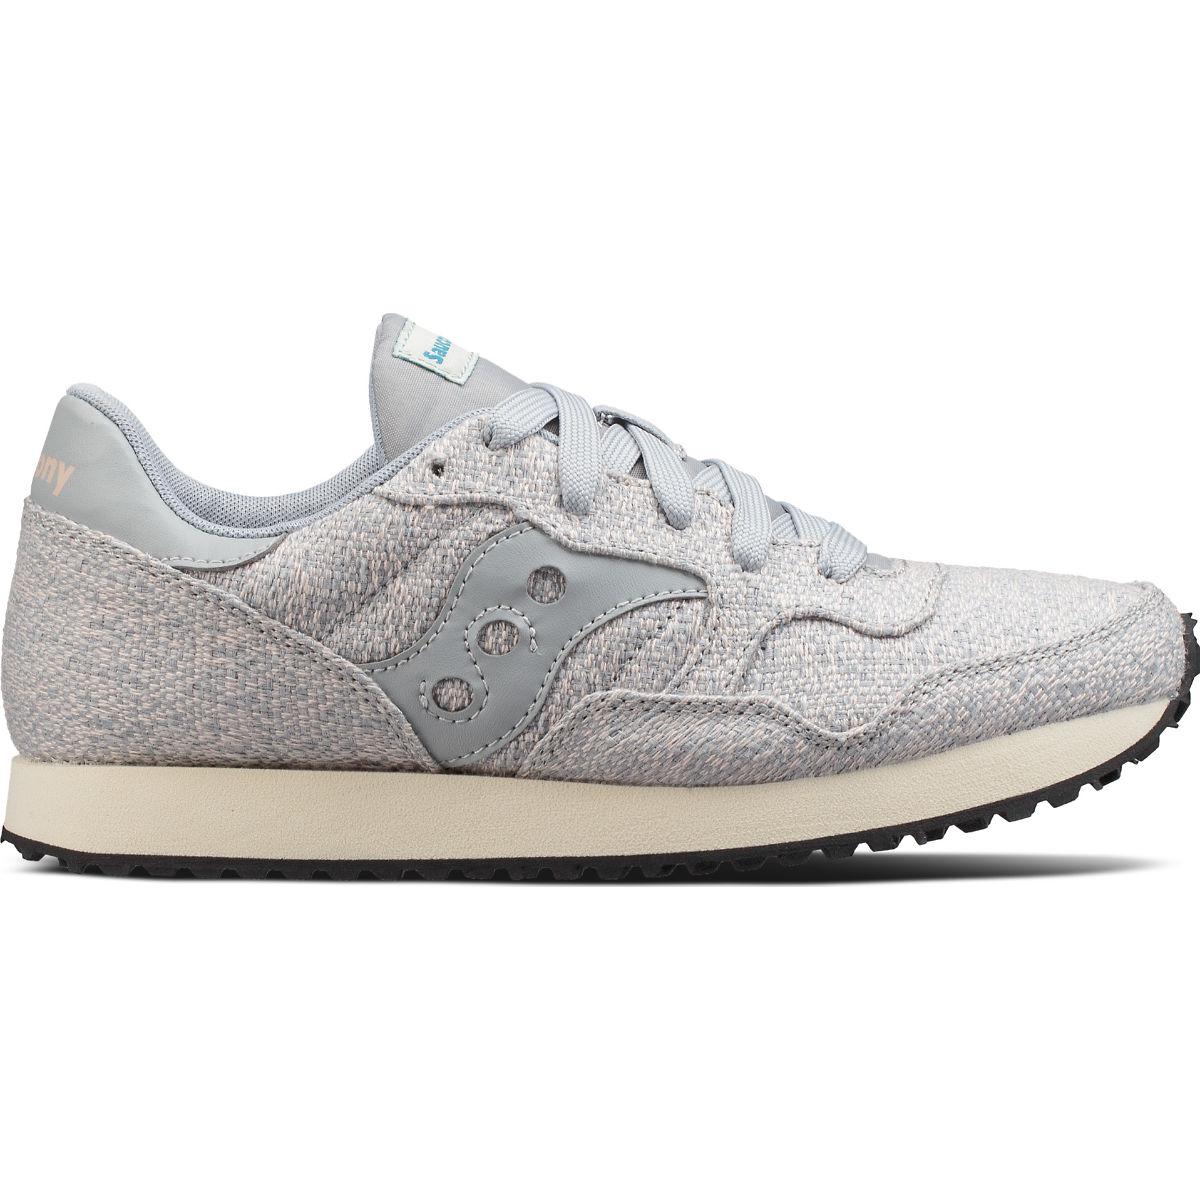 Saucony Suede Dxn Trainer Cl Knit in Grey (Gray) - Lyst